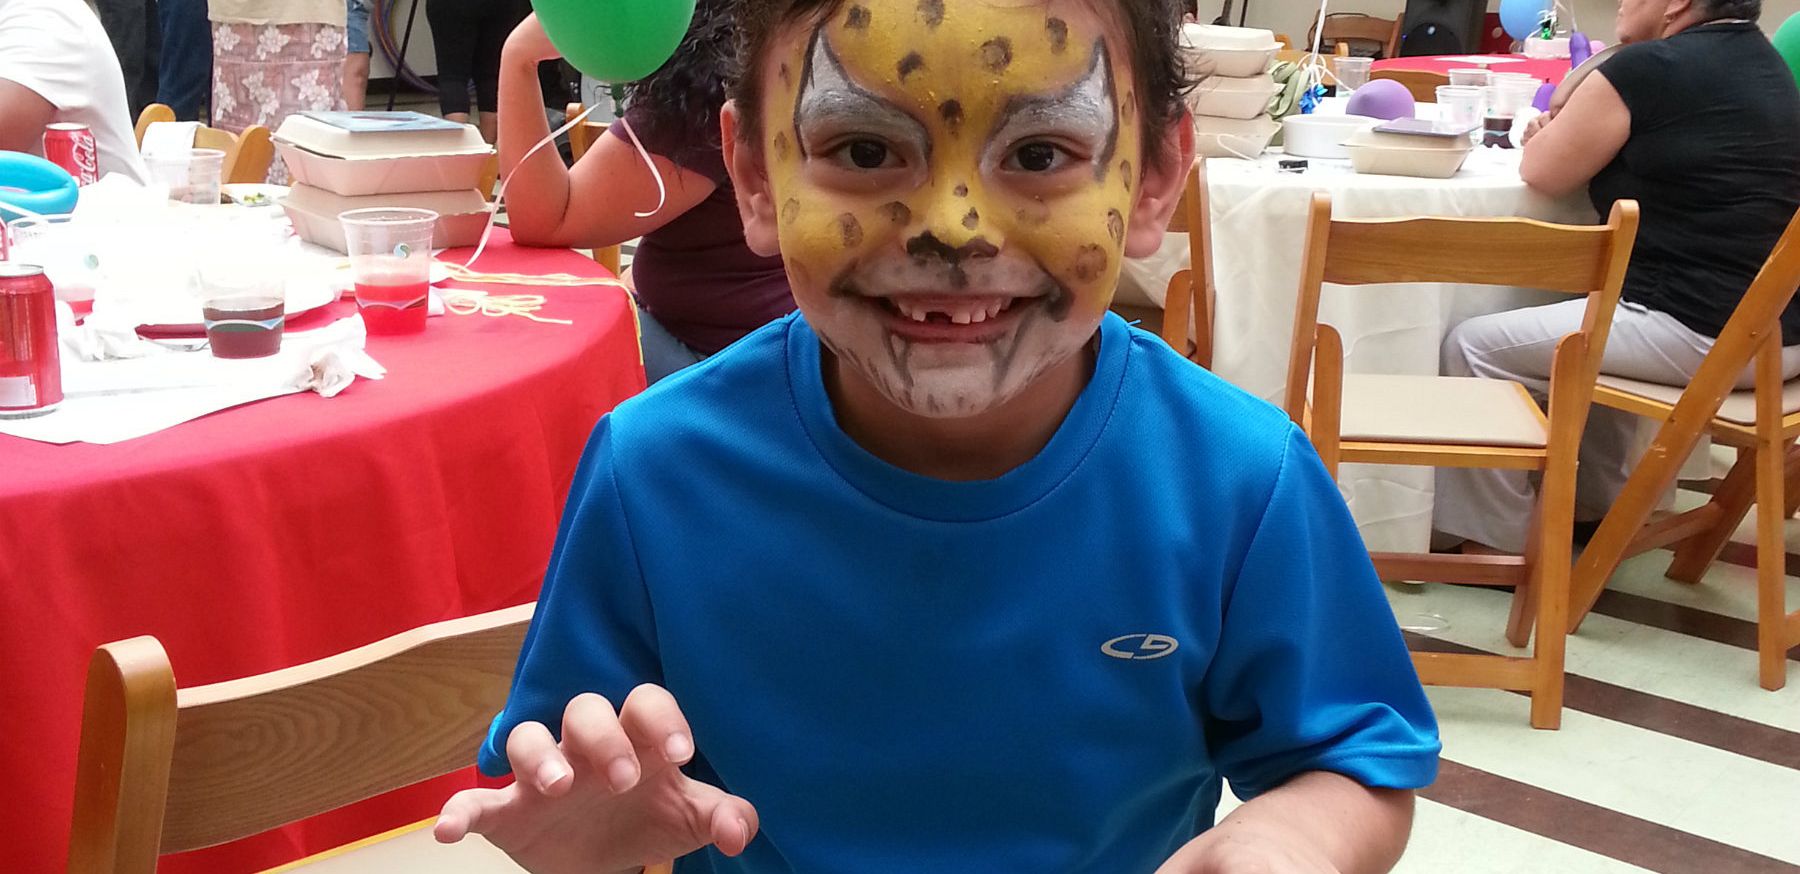 Christopher with Tiger Face Paint 